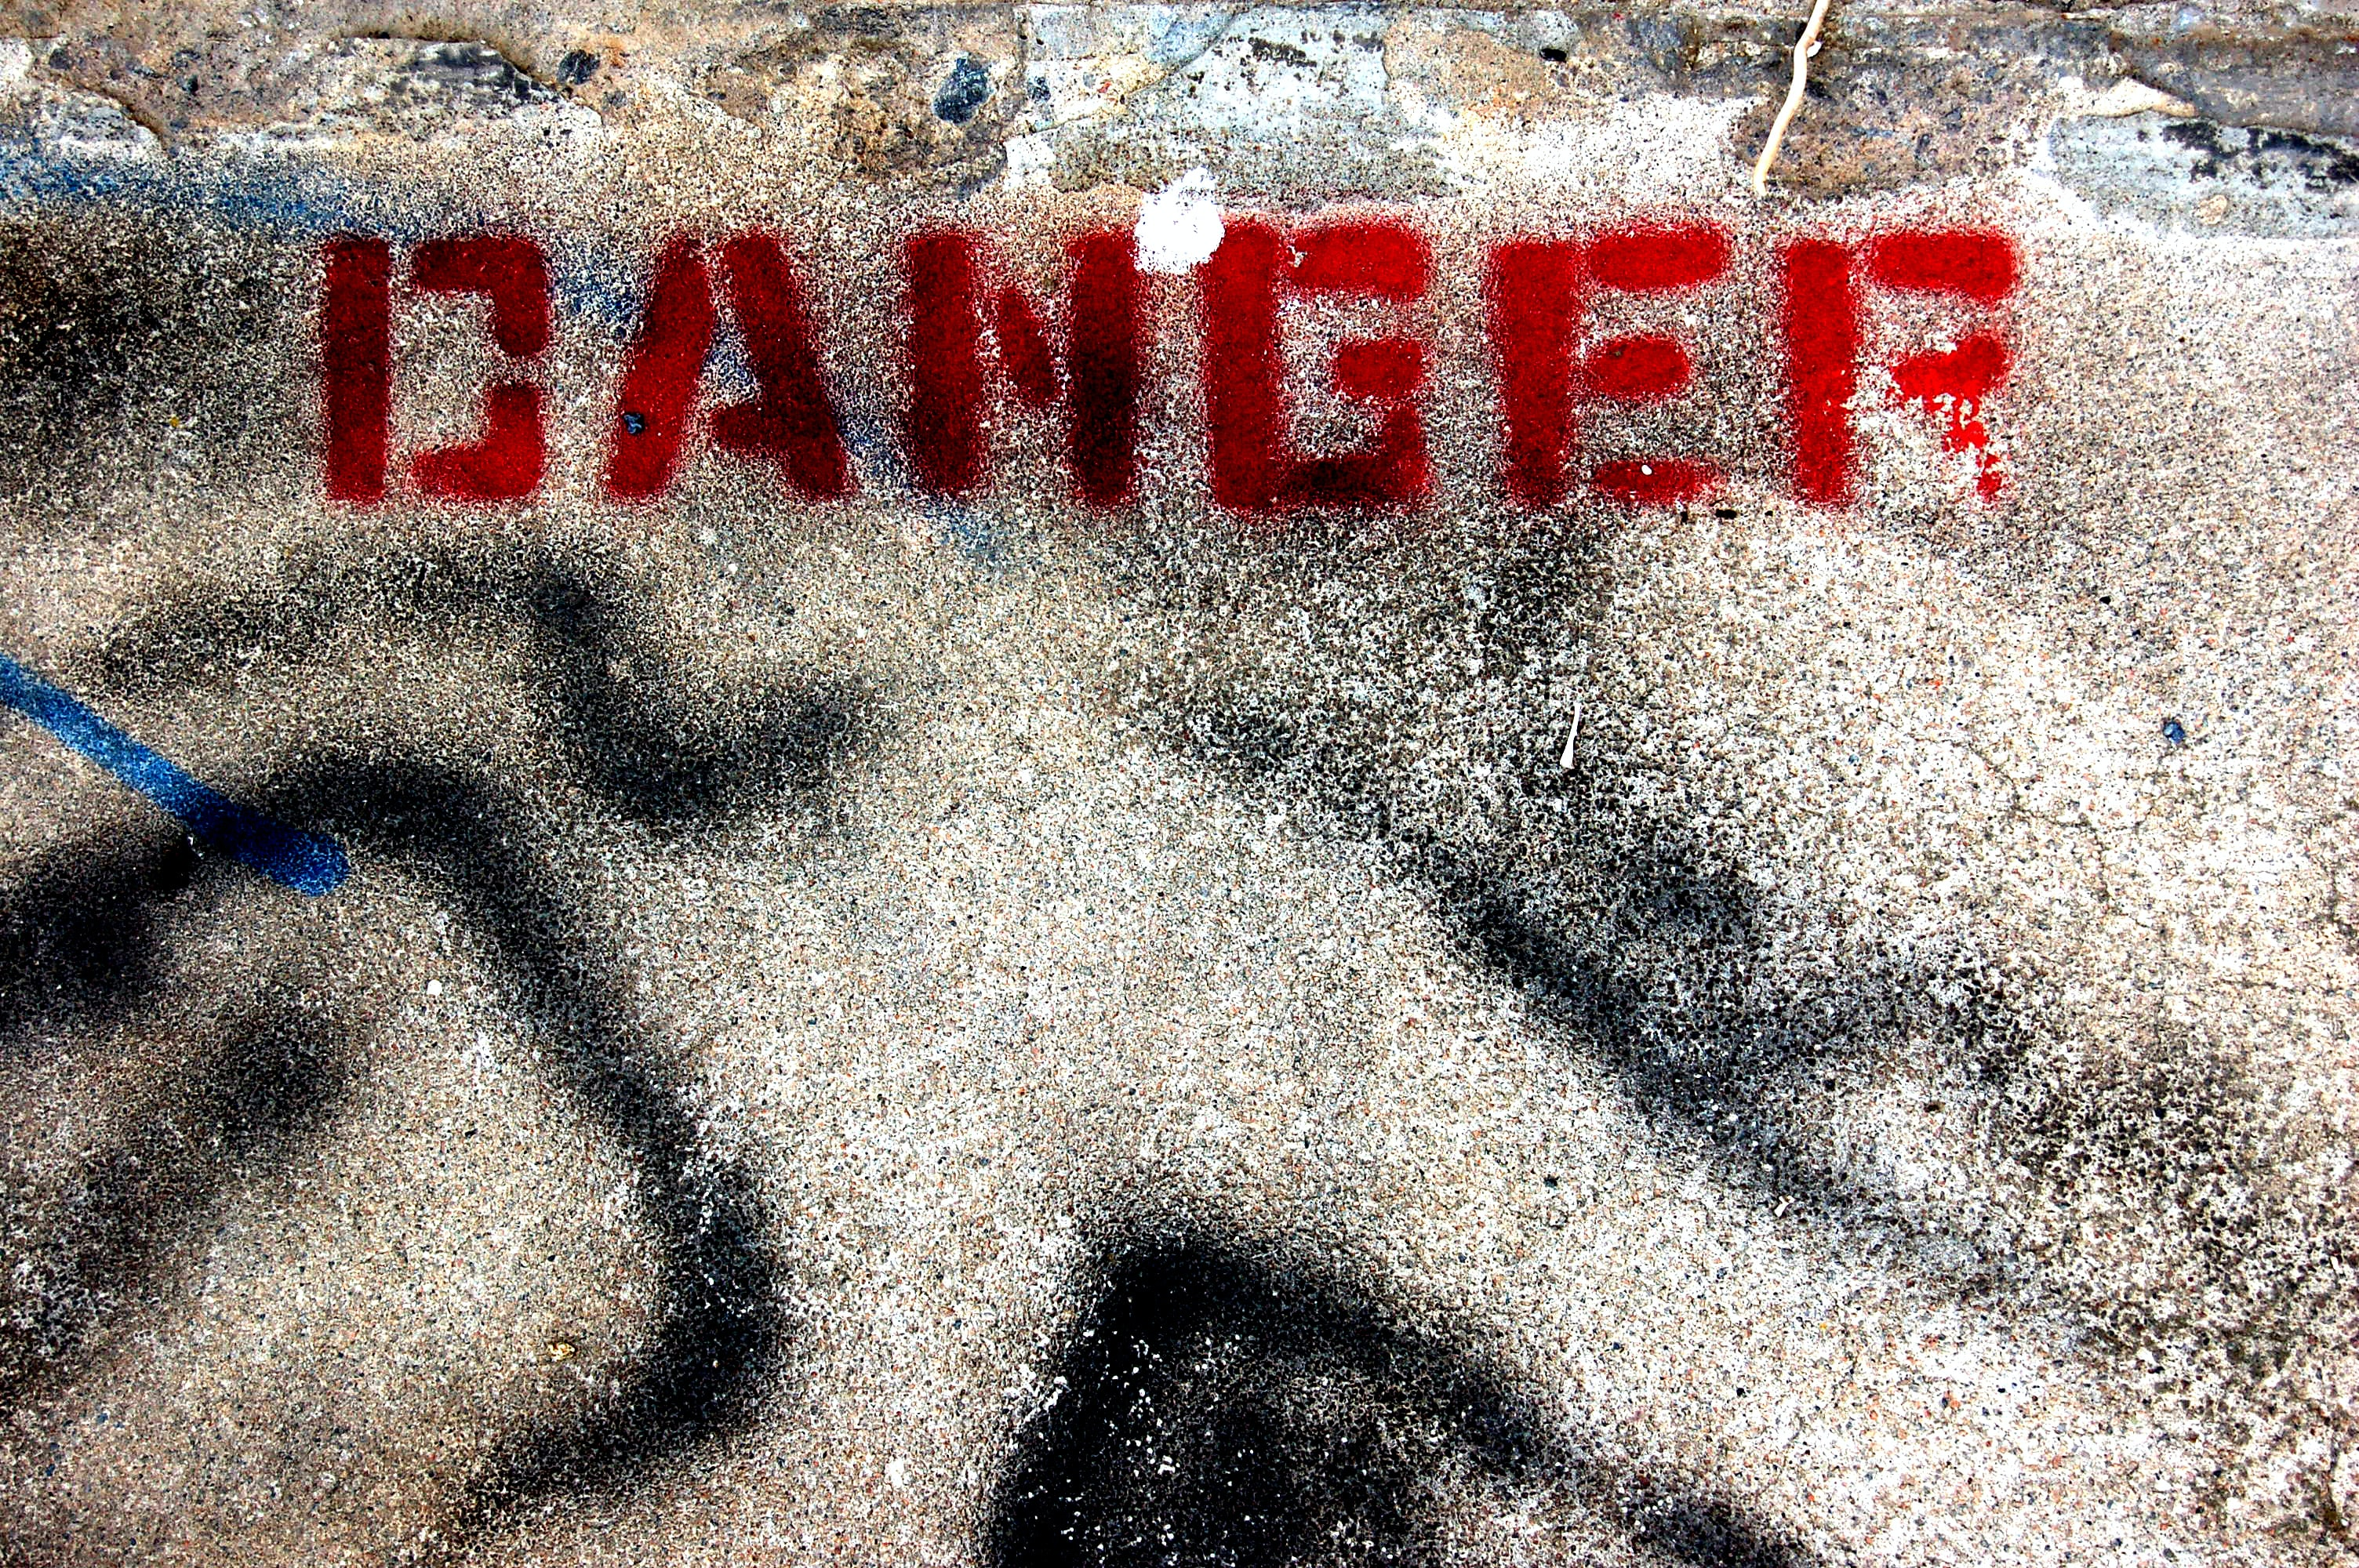 A spray painted on a road that says "Danger".